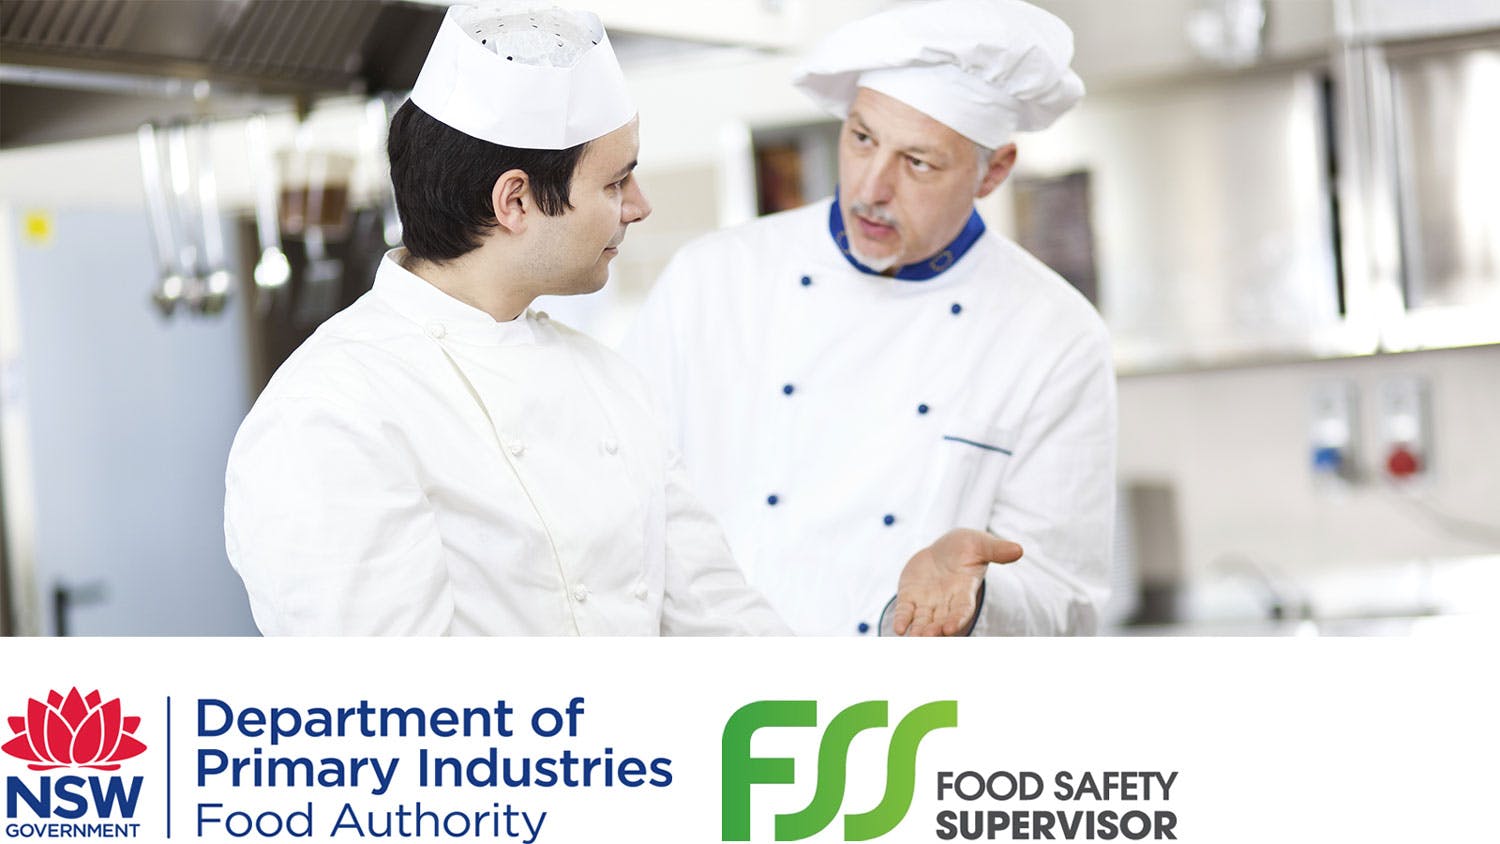 Food Safety Supervisor Certificate Renewal NSW